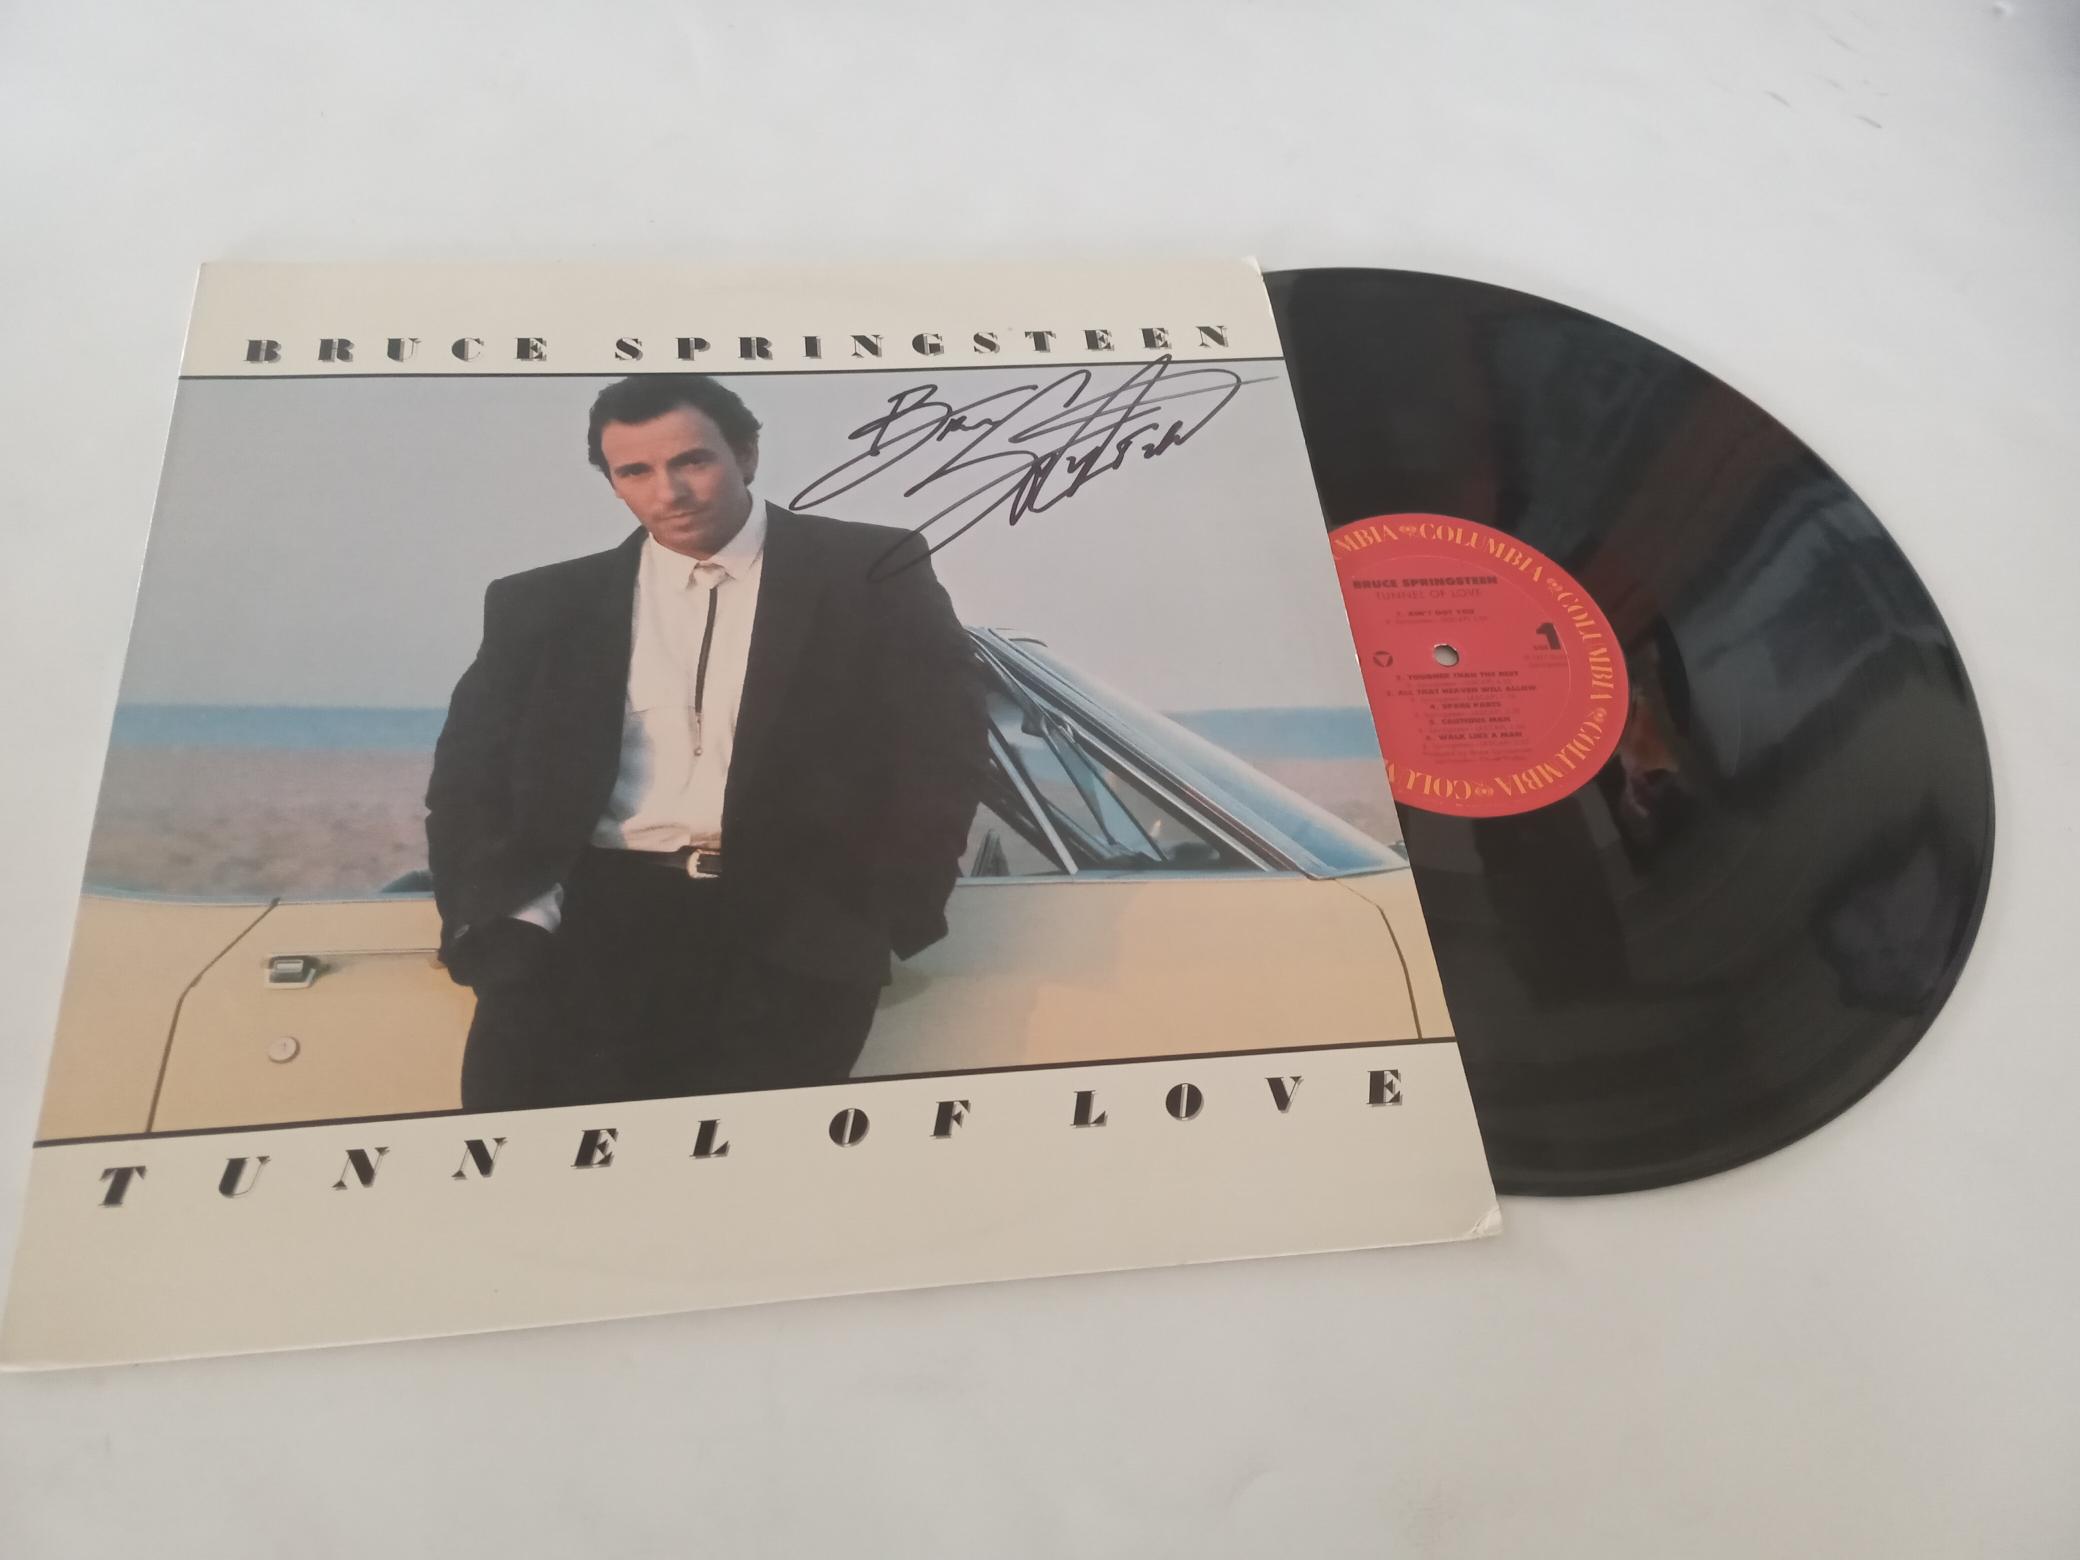 Bruce Springsteen 'Tunnel of Love' LP signed with proof